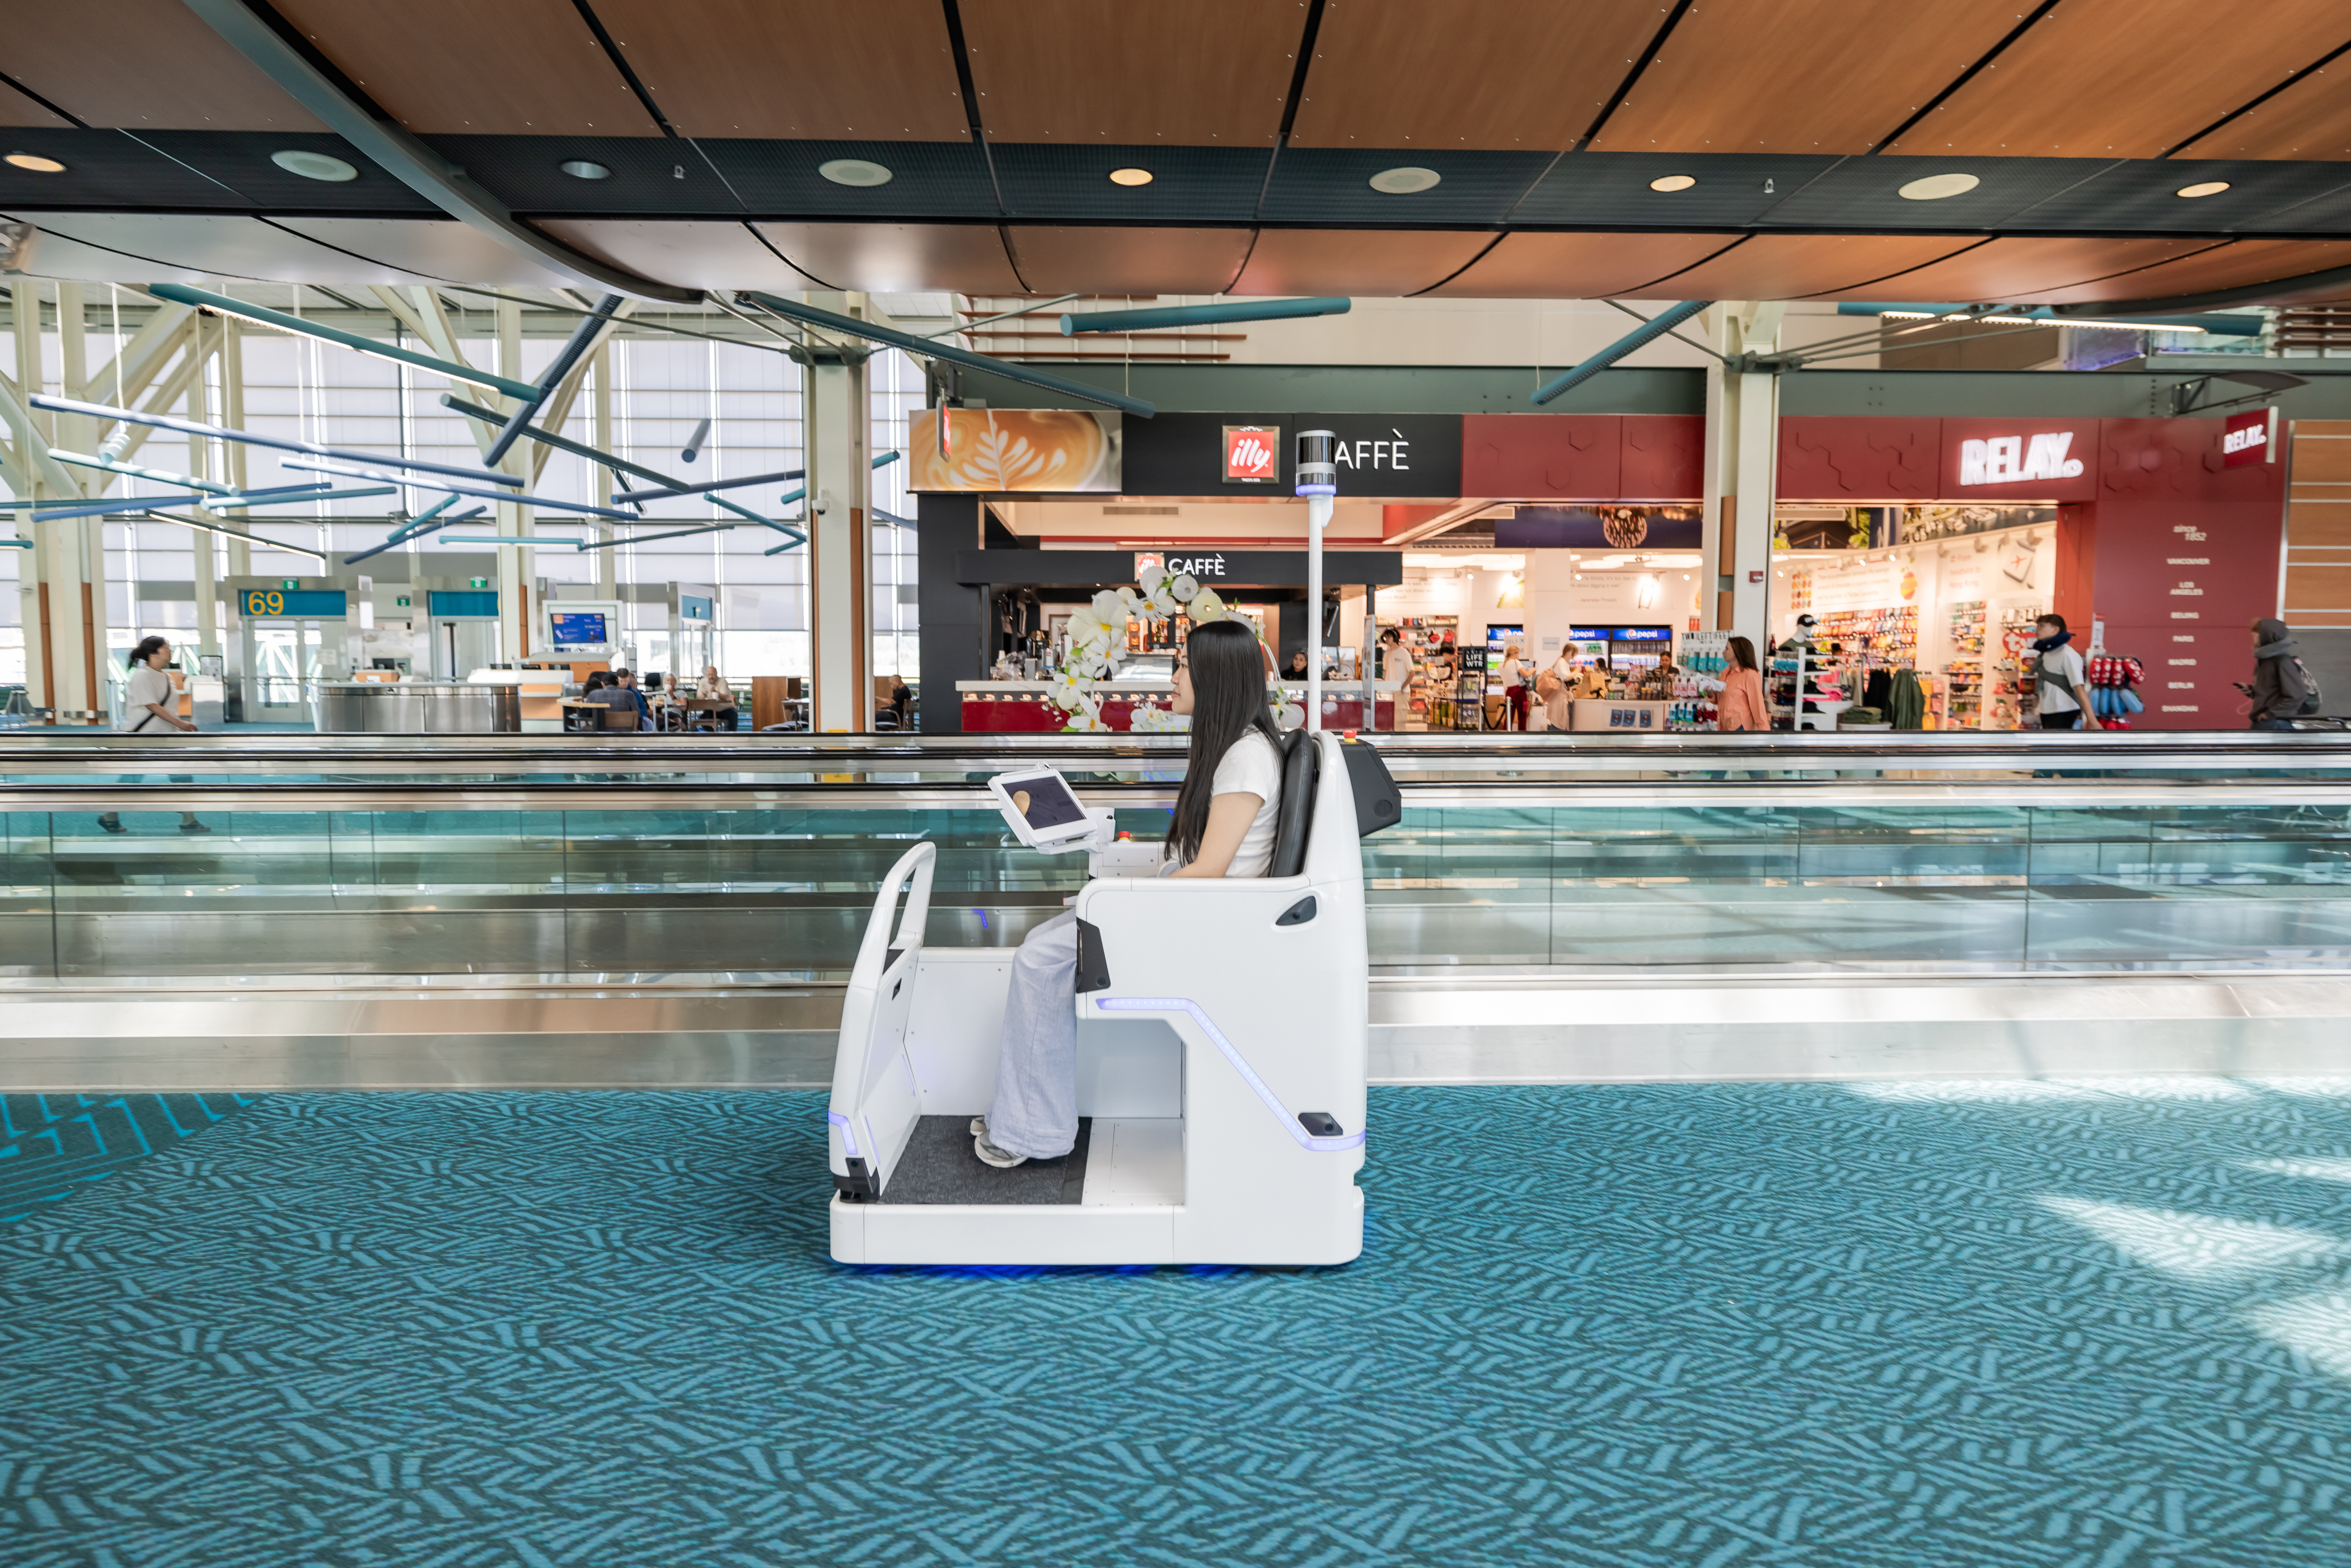 A&K Robotic's Cruz mobility pods being tested at Vancouver International Airport (YVR)